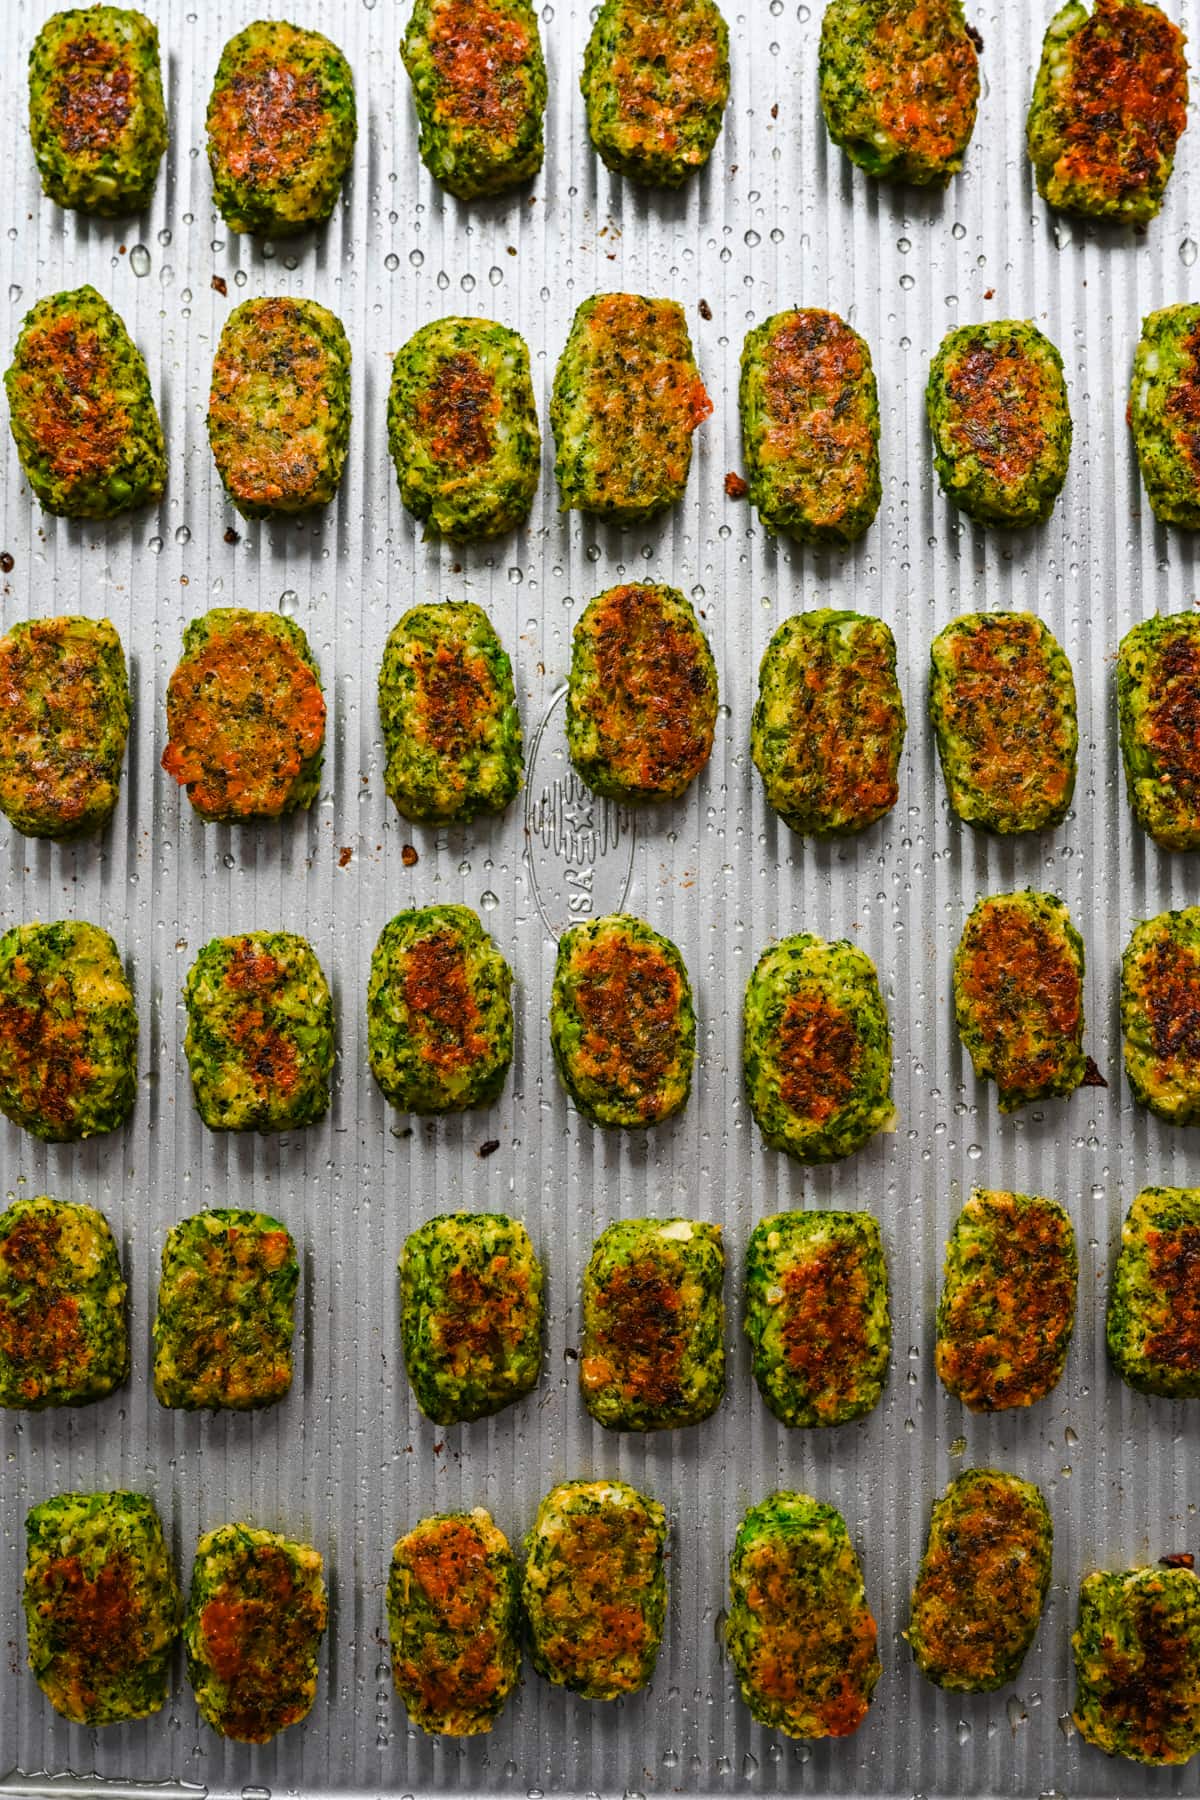 Overhead view of finished broccoli tots.